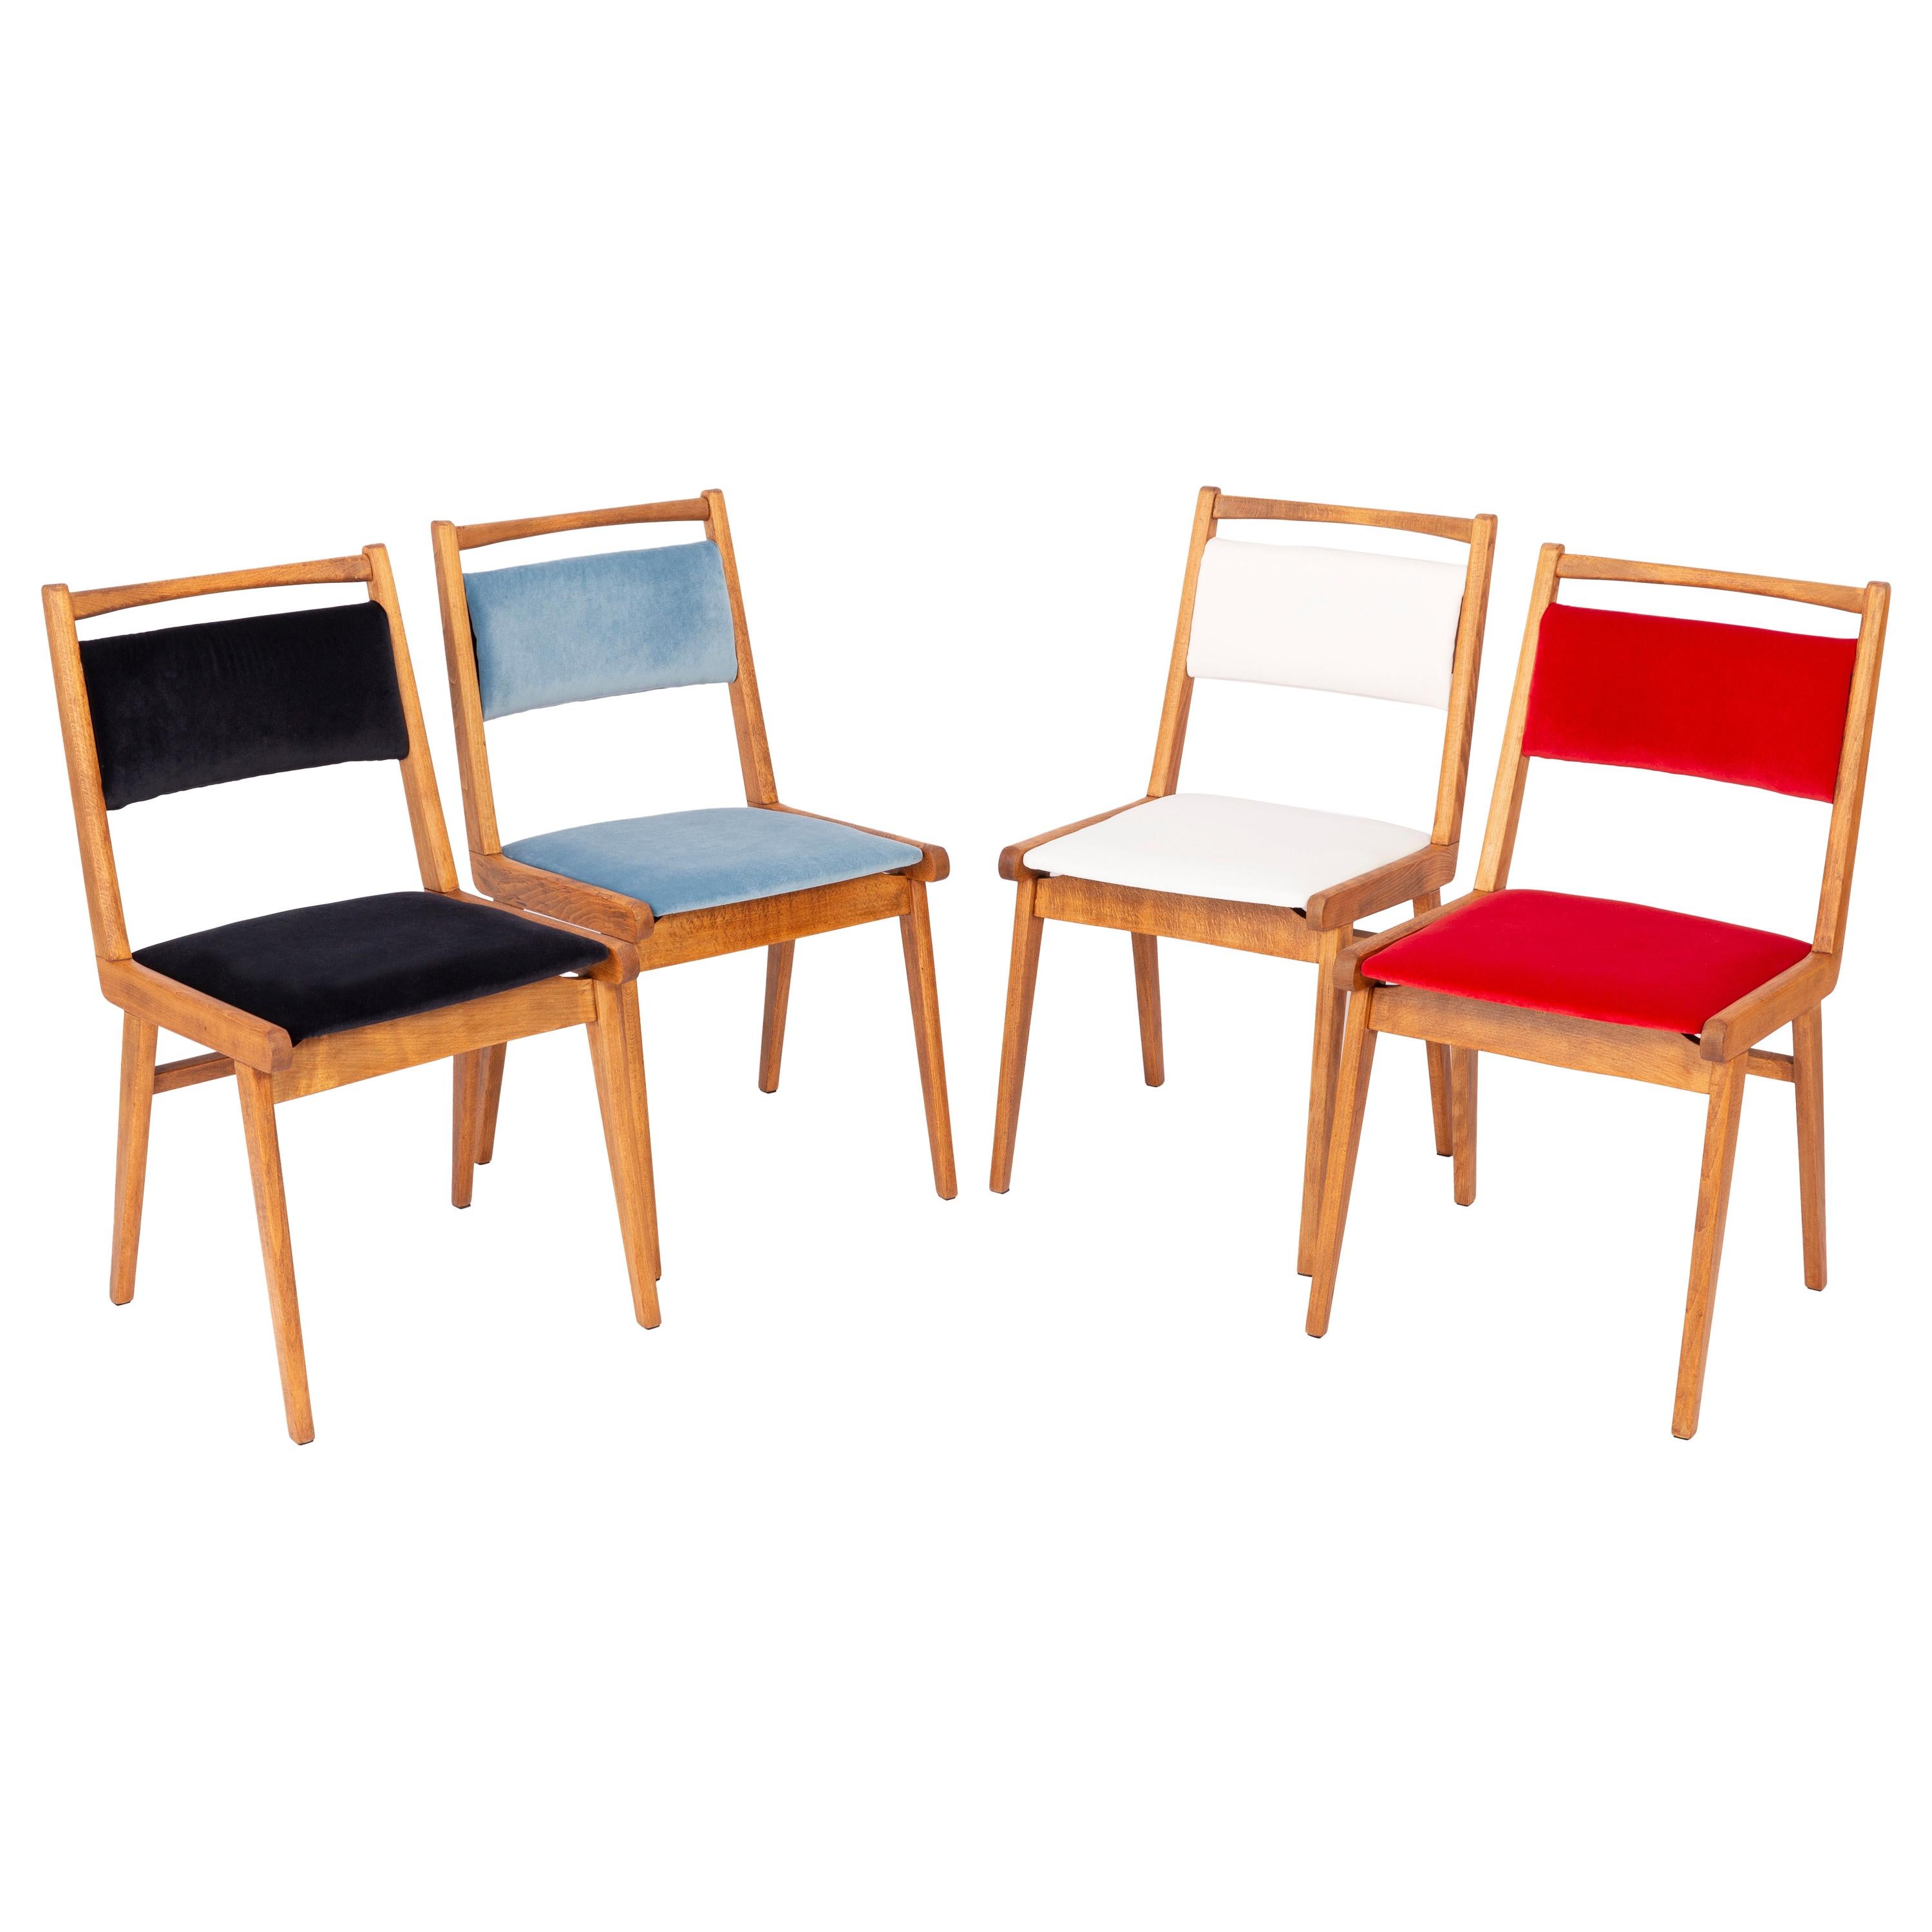 Set of Four 20th Century Black Blue White and Red Velvet Chairs, Poland, 1960s For Sale